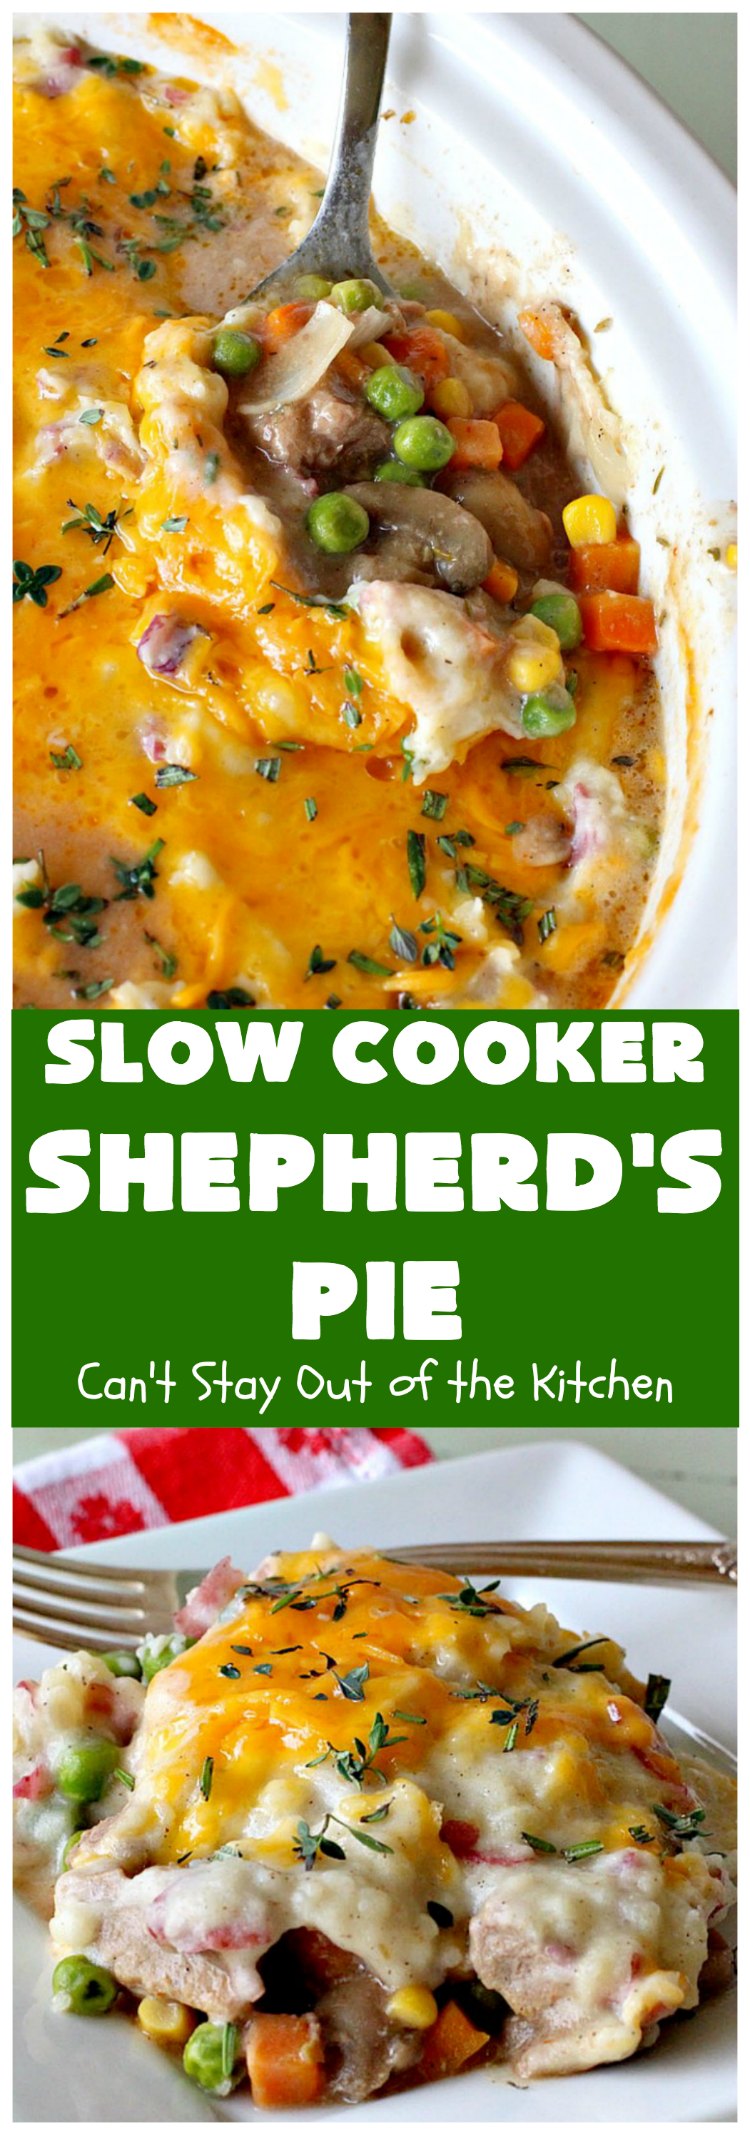 Slow Cooker Shepherd's Pie | Can't Stay Out of the Kitchen | this awesome #ShepherdsPie #recipe will have you licking your chops from the first bite! It's irresistible comfort food & easier to make since it's made in the #SlowCooker. Wonderful for company or family dinners. #beef #cheese #peas #corn #carrots #RedPotatoes #crockpot #SlowCookerShepherdsPie #BestShepherdsPie #FavoriteShepherdsPie